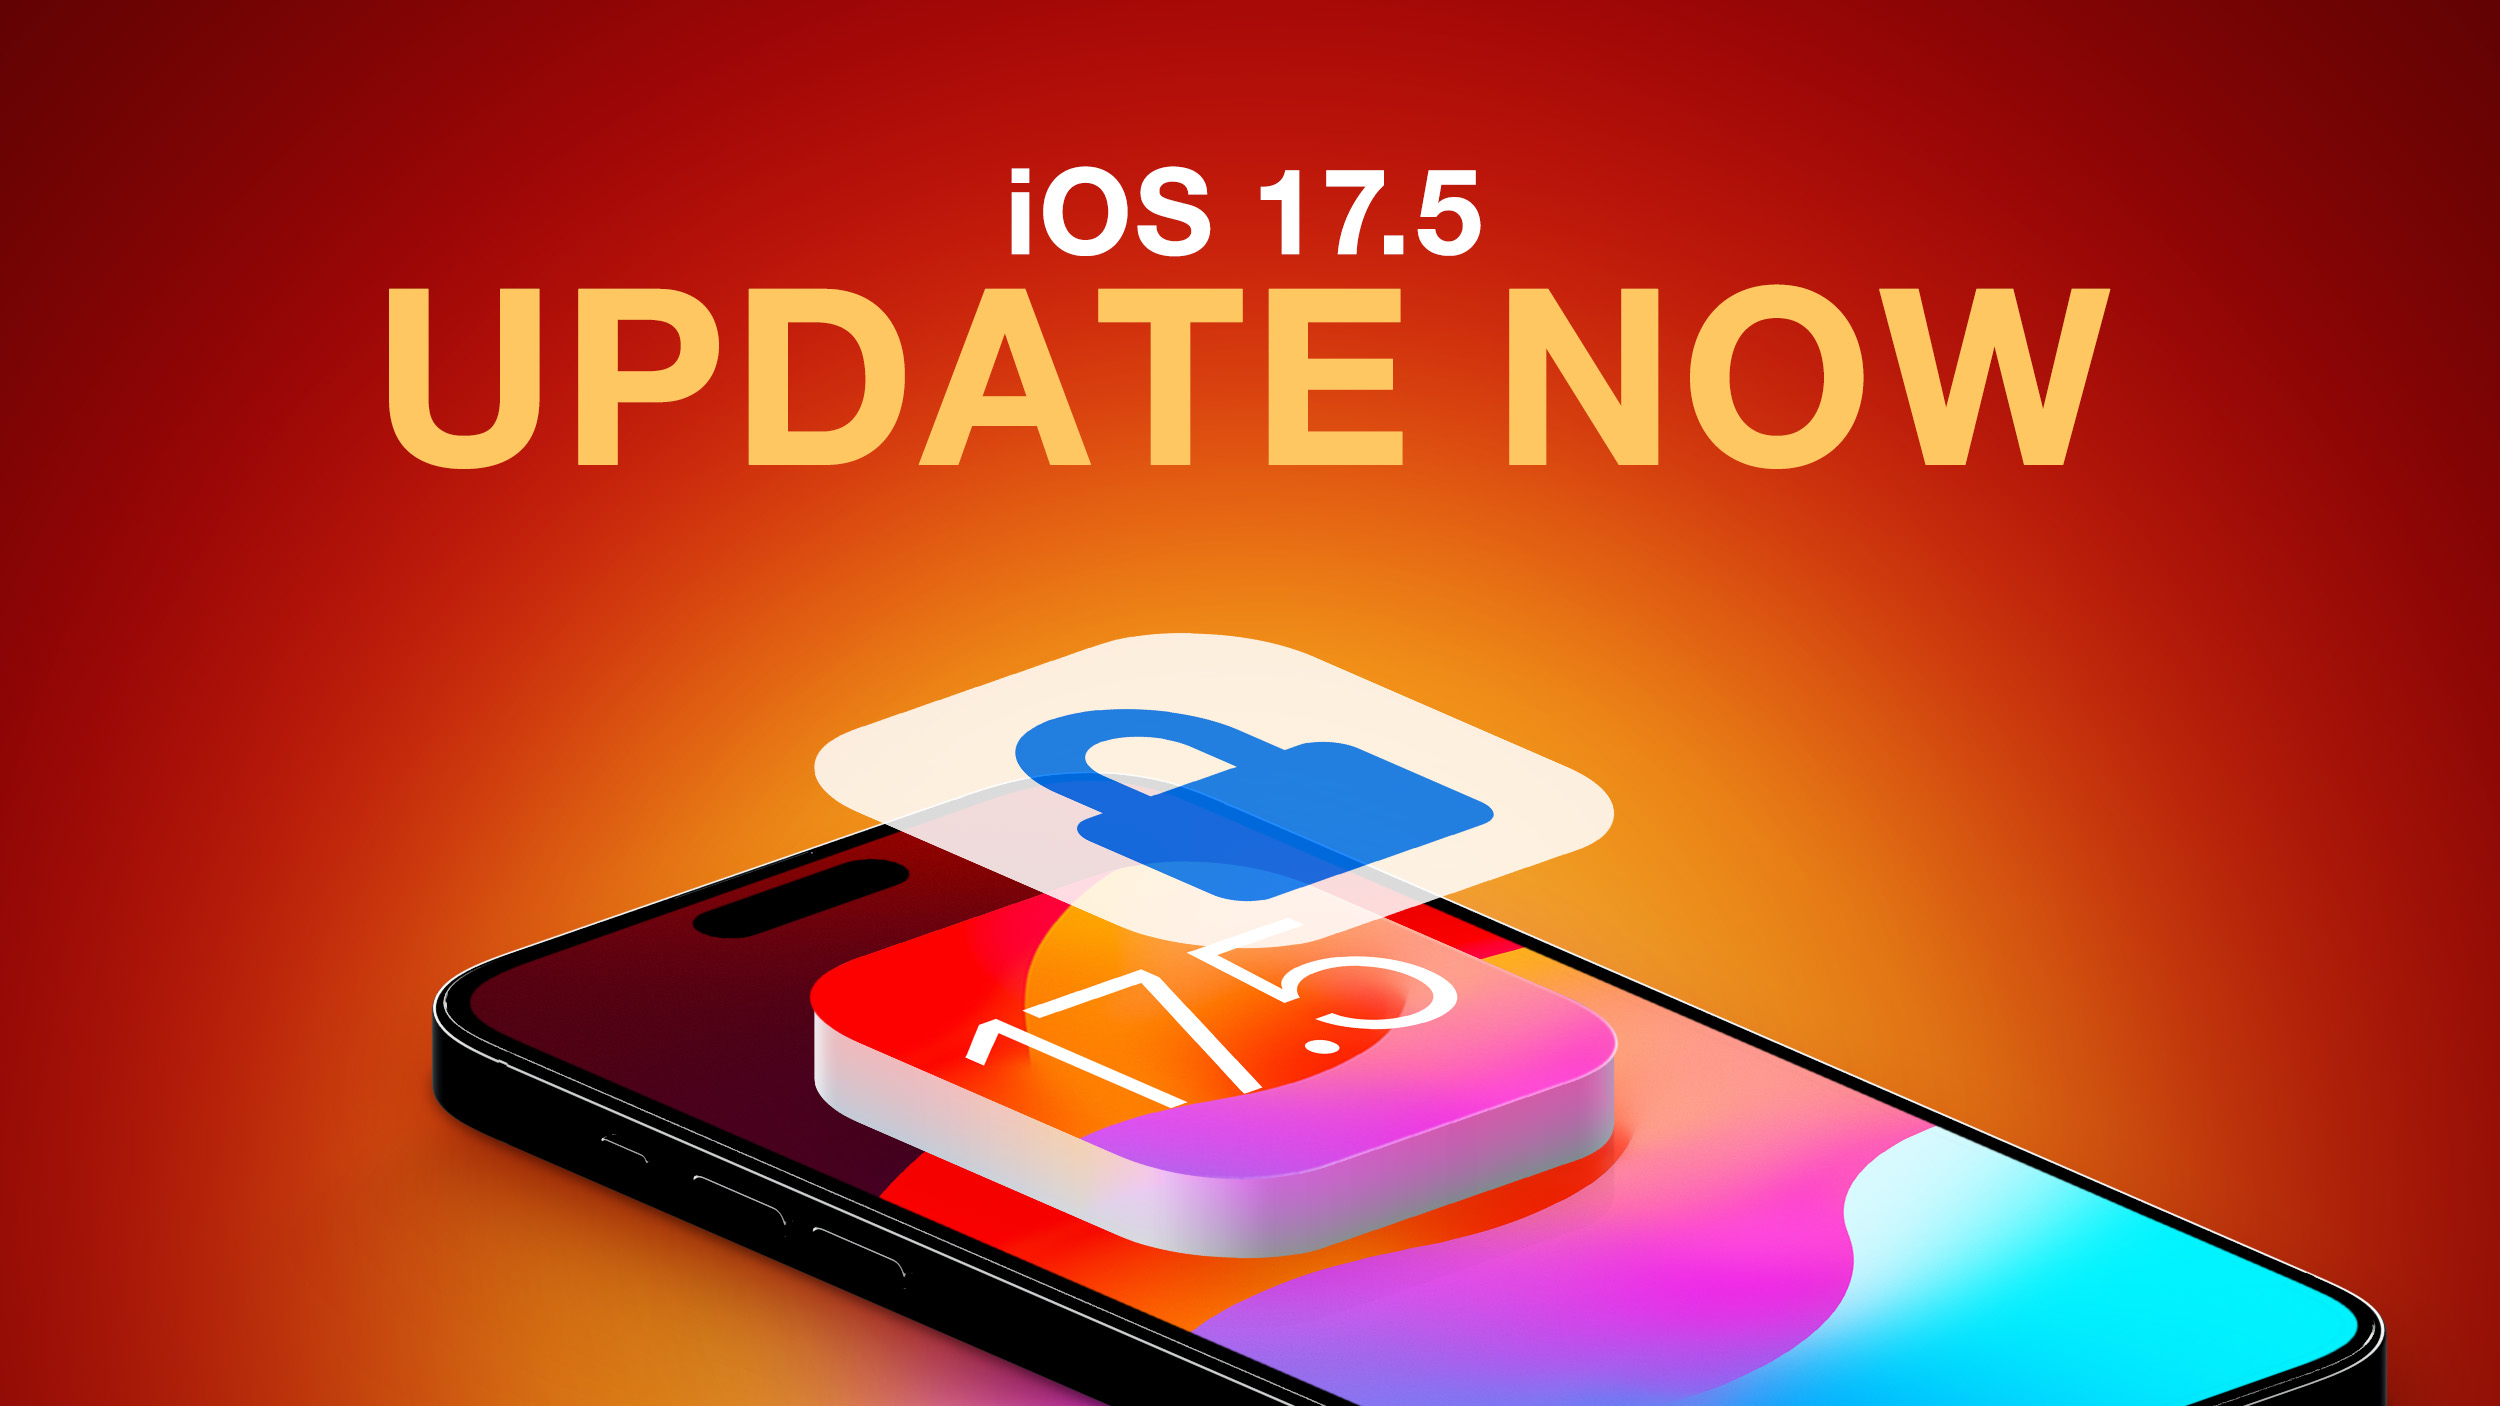 iOS 17.5 Includes These 15 Security Fixes, But One Causes Another Bug